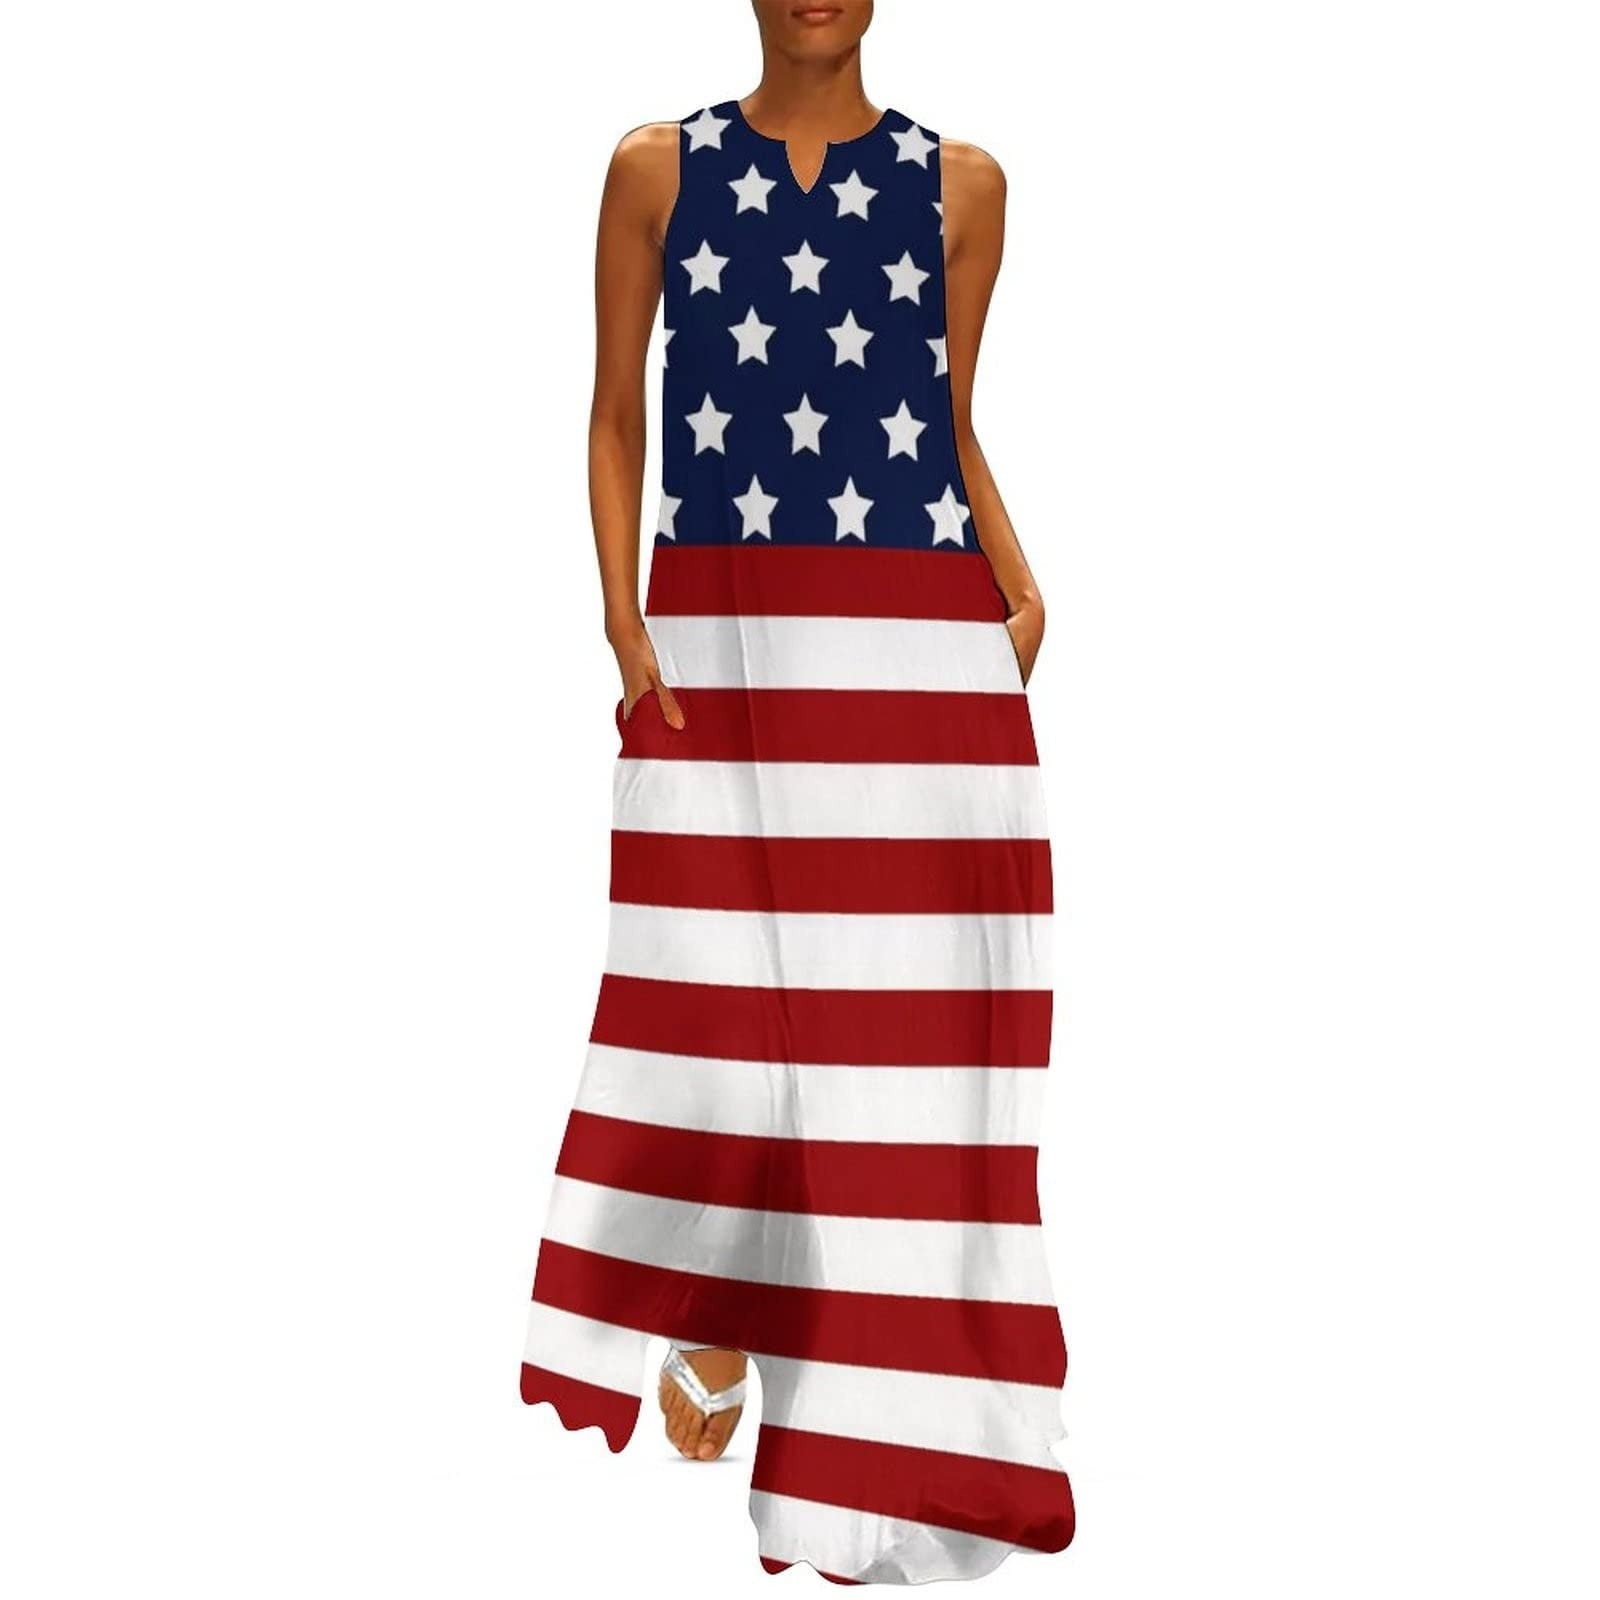 XMMSWDLA Maxi Dress for Women with Pockets Patriotic American Flag ...